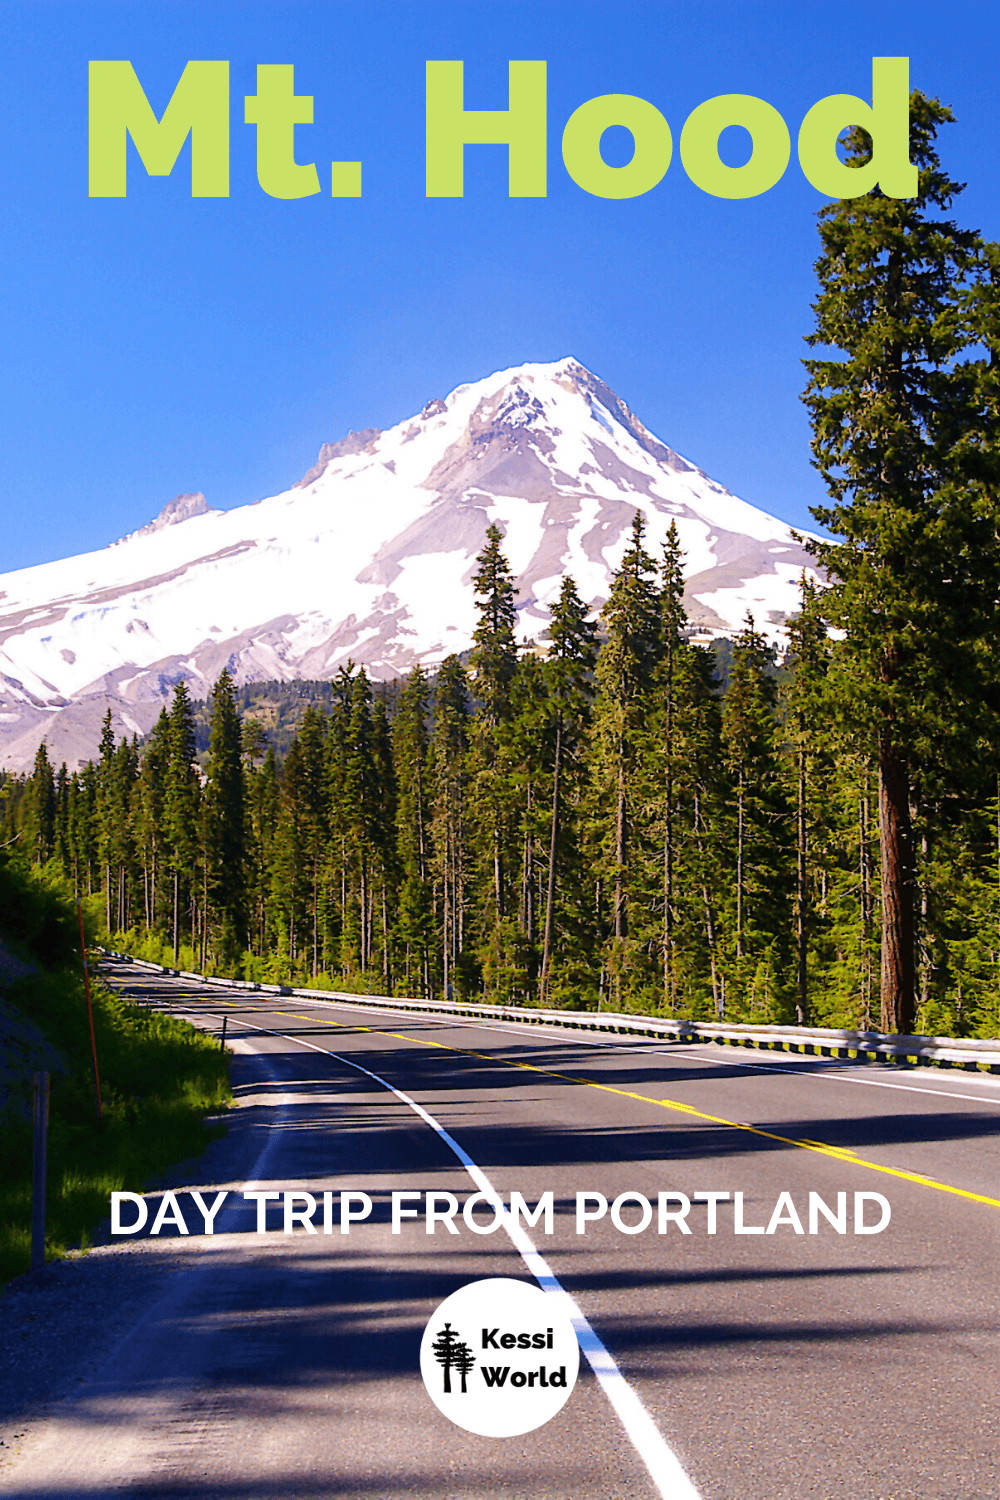 This Pinterest tile shows Mt. Hood from a highway approaching the snowy peak. The sky is bright blue and a fir tree forest borders both sides of the paved road with yellow stripe in the middle and a metal guardrail on one side.